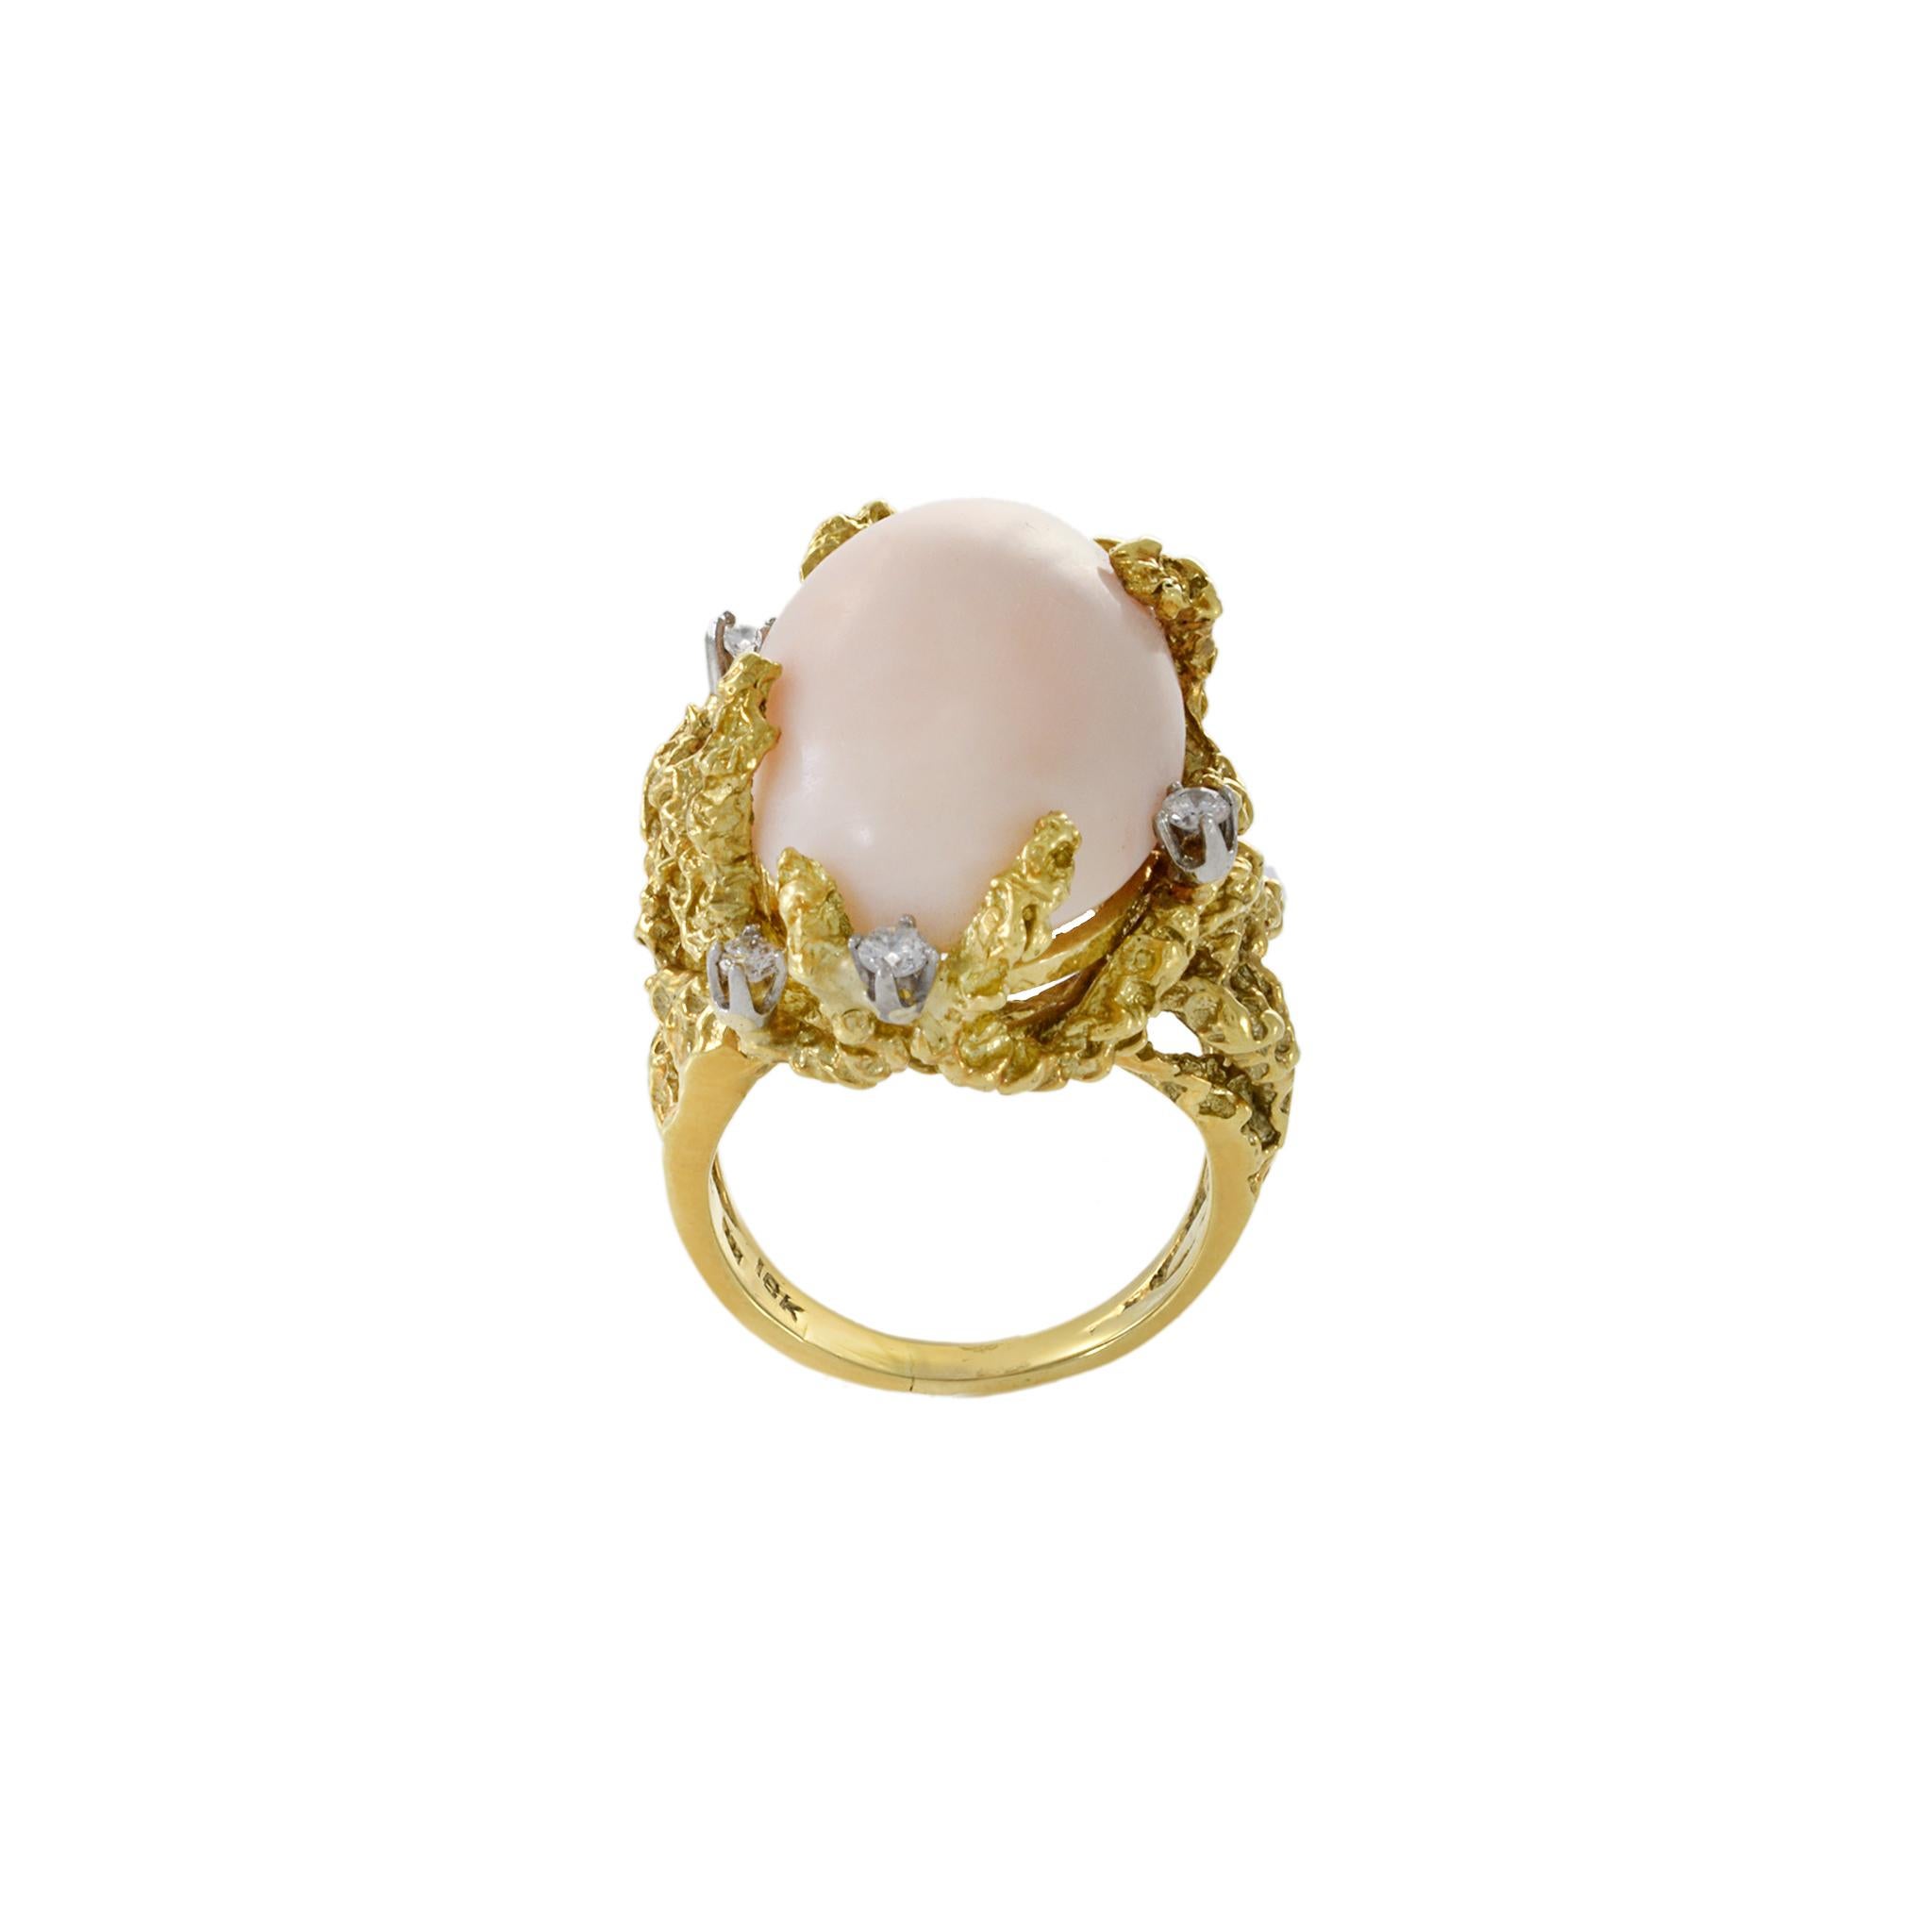 Retro Era 18KT Yellow Gold Angel Skin Coral And Diamond Ring For Sale 3